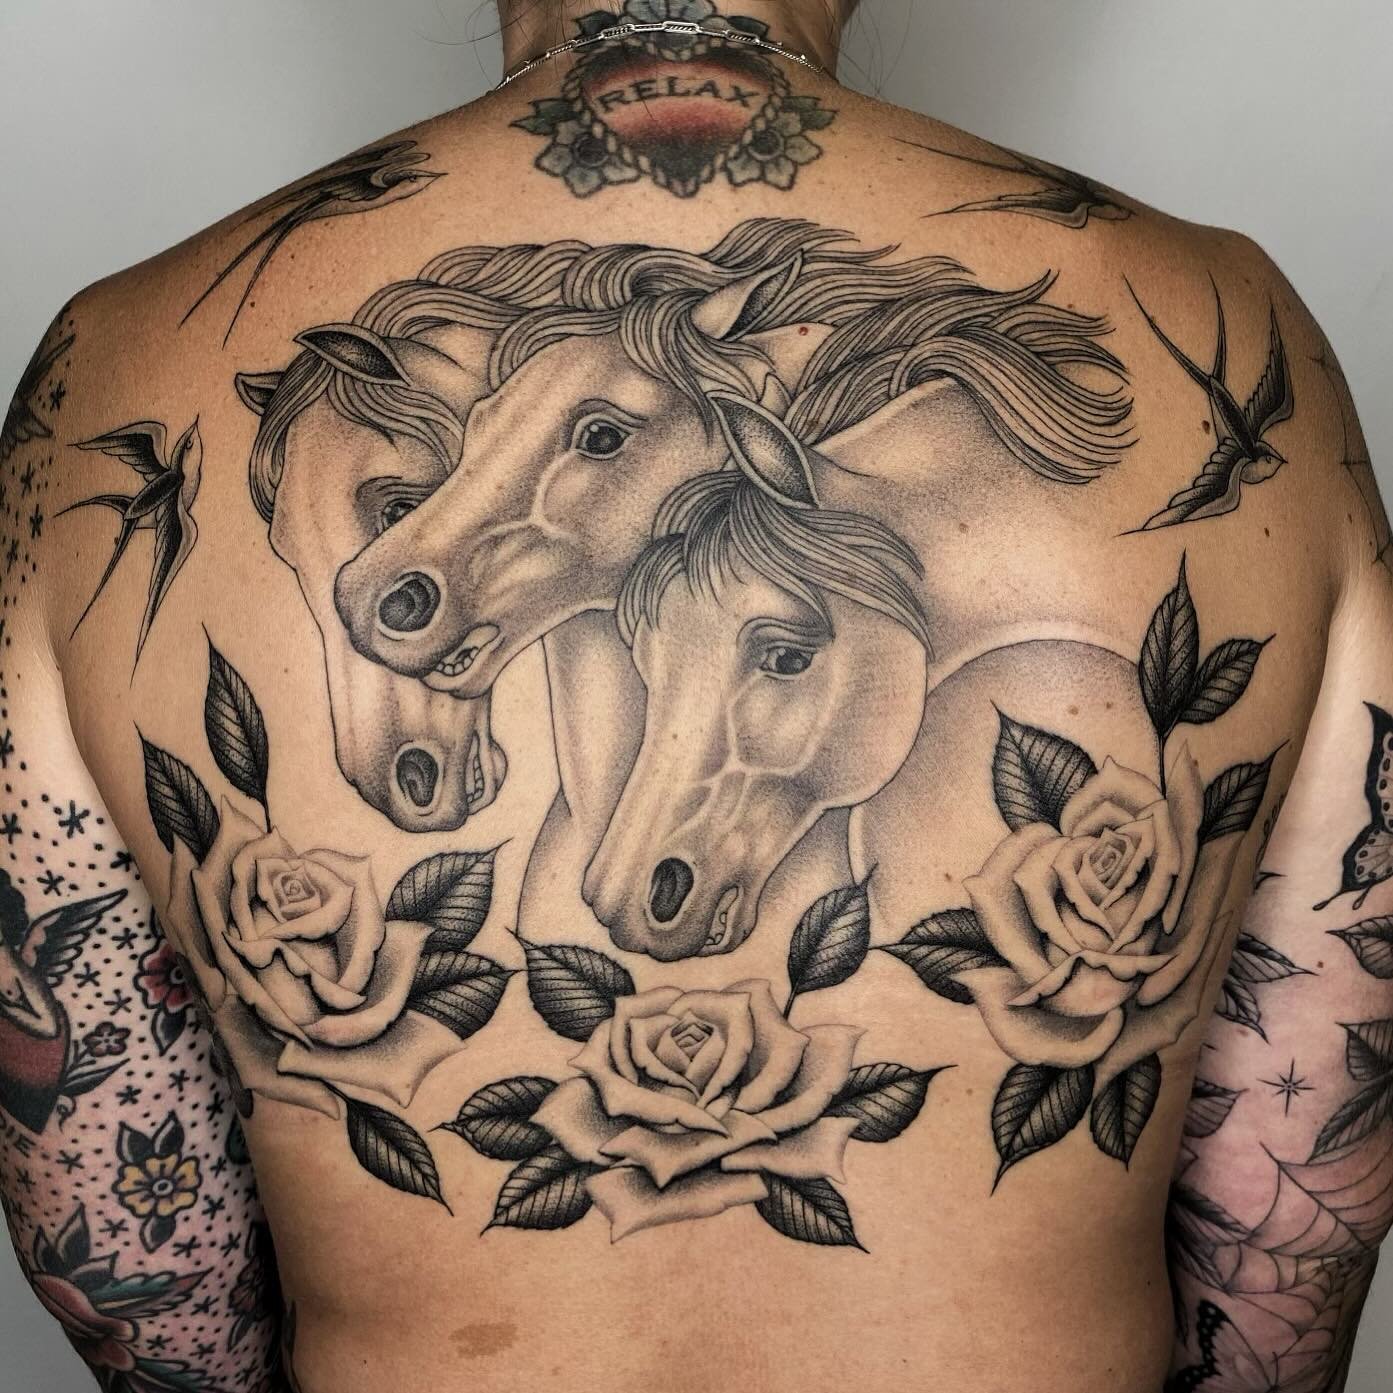 Back piece by @karlwillmann 
Karl is with us on Fridays and Saturdays! To book in with Karl either message him directly, send us an email, DM or call 07 5648 0626
&bull;
&bull;
&bull;
&bull;
&bull;
#new #fyp #tradtattoo #goldcoast #goldcoasttattoo #v